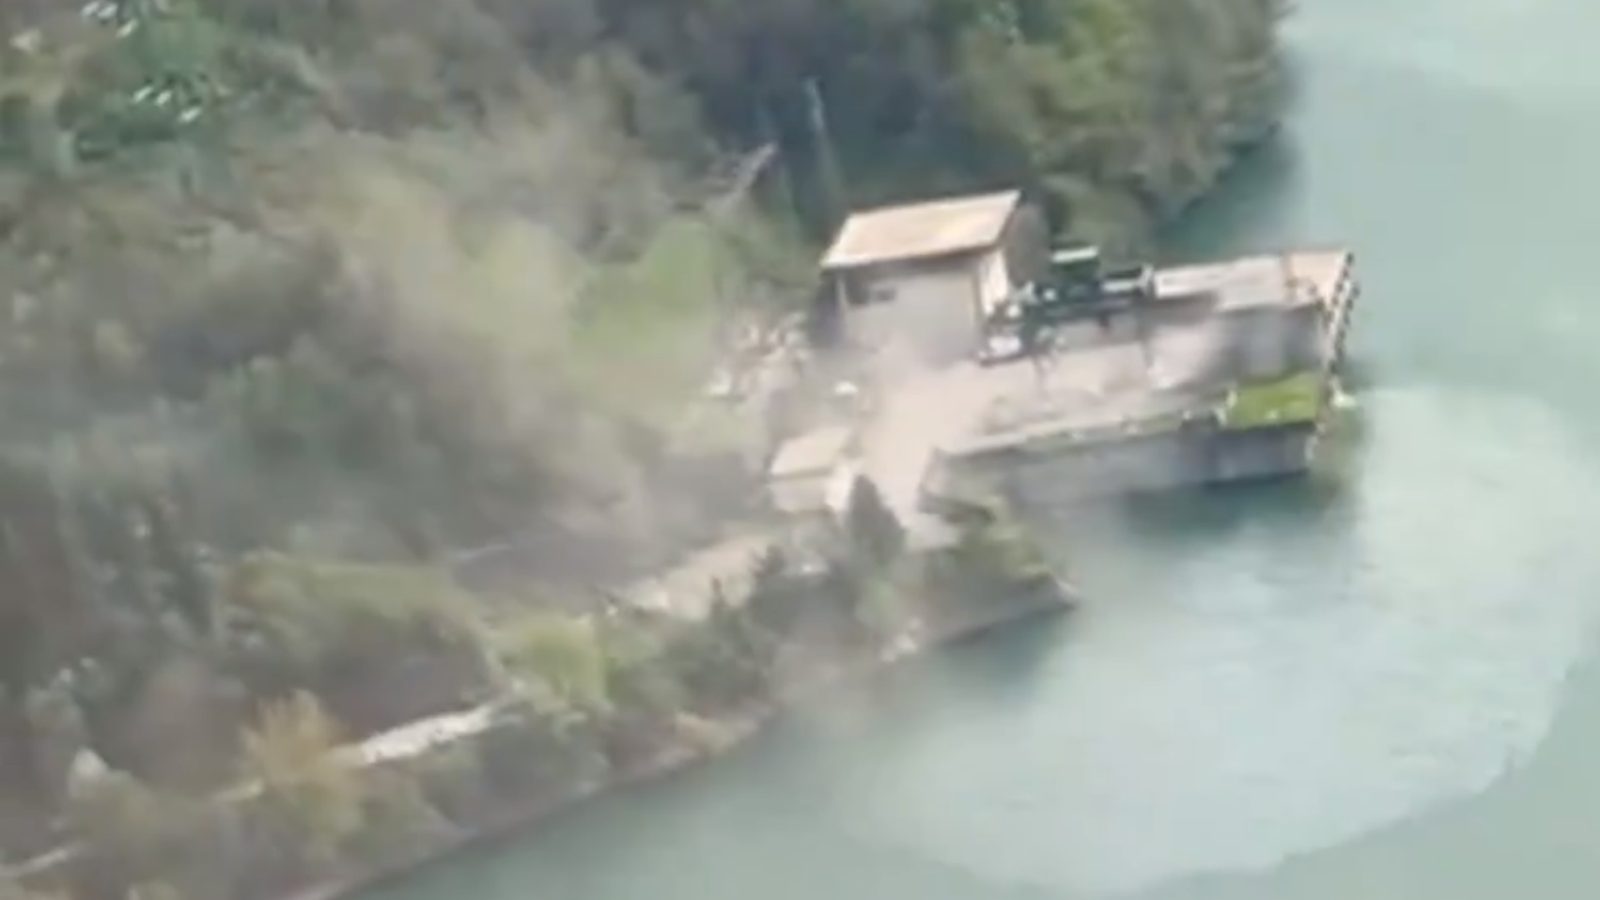 Explosion at Hydroelectric Power Plant in Italy Leaves Four Dead and Several Missing